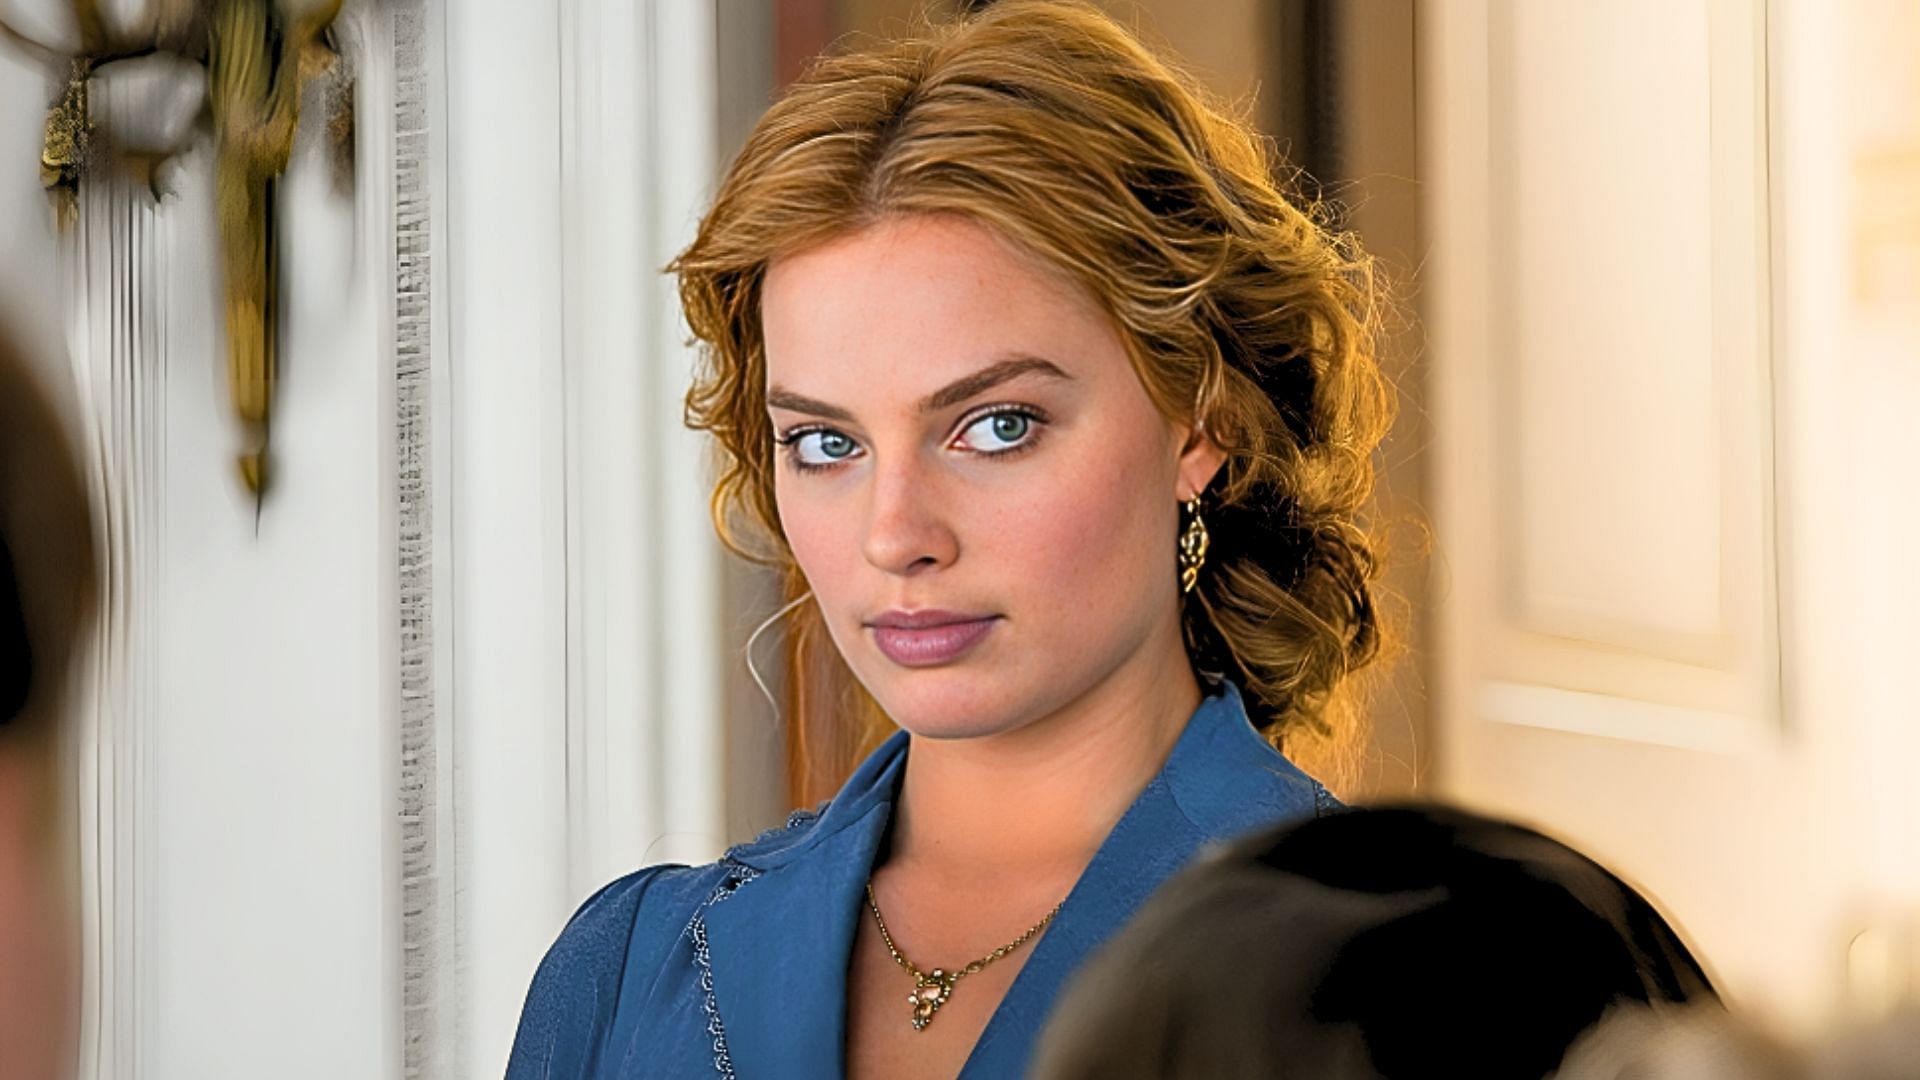 Margot Robbie has not expressed interest in portraying Elsa in a live-action Frozen movie (Image via Jonathan Olley - &copy; 2014 Warner Bros. Entertainment Inc., WV Films IV LLC and Ratpac-Dune Entertainment LLC--U.S., Canada, Bahamas &amp; Bermuda)